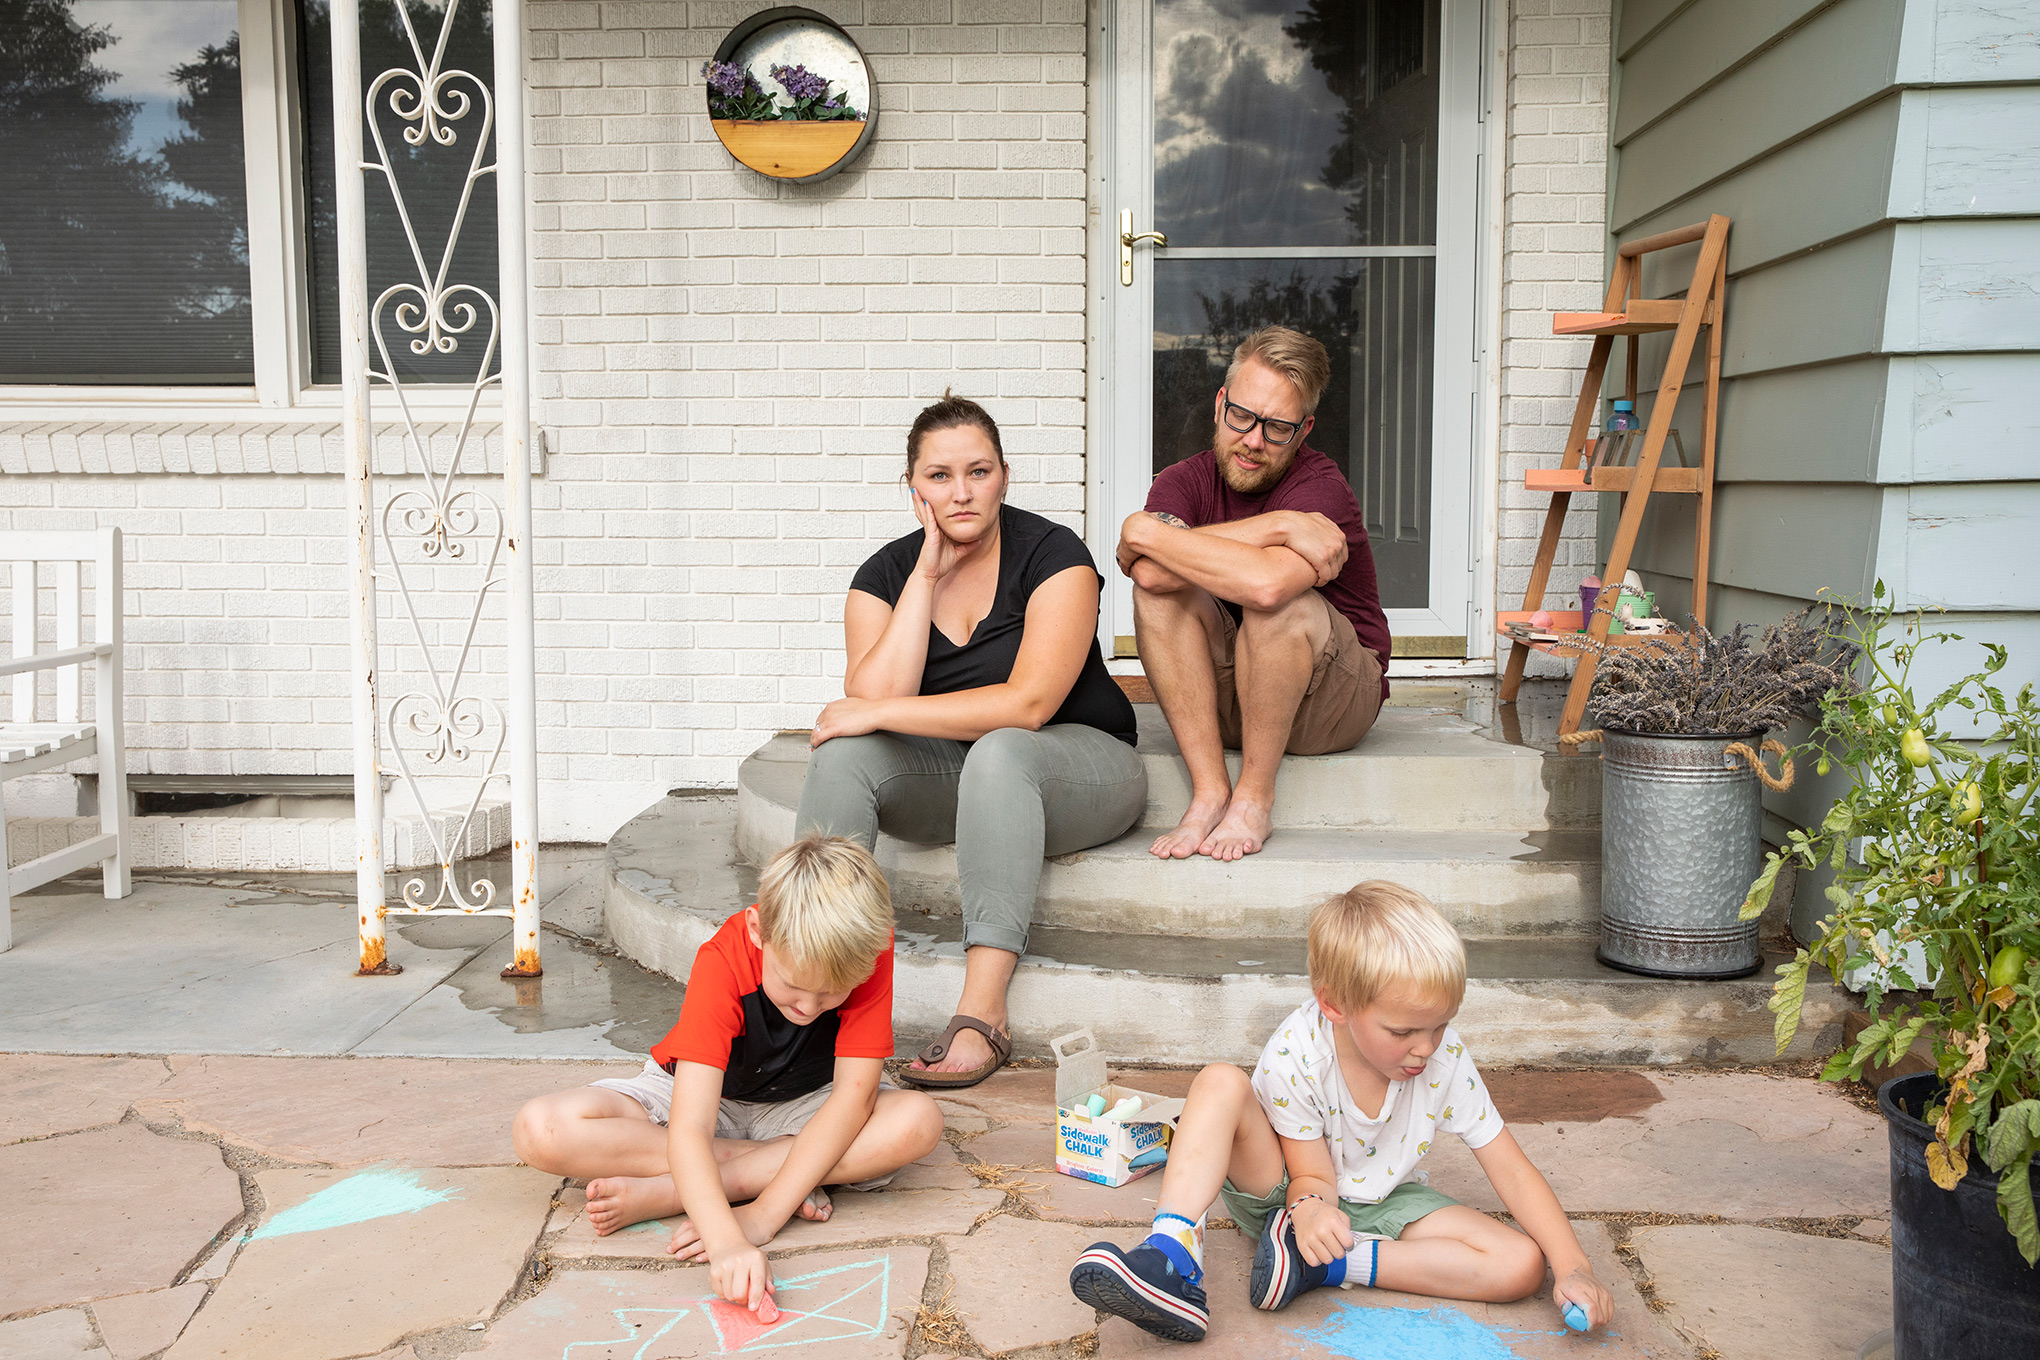 Kayla Brim with her family, outside their home in Caldwell, Idaho, on Aug. 11. Brim has been sick with COVID-19 since early July. (Angie Smith for TIME)